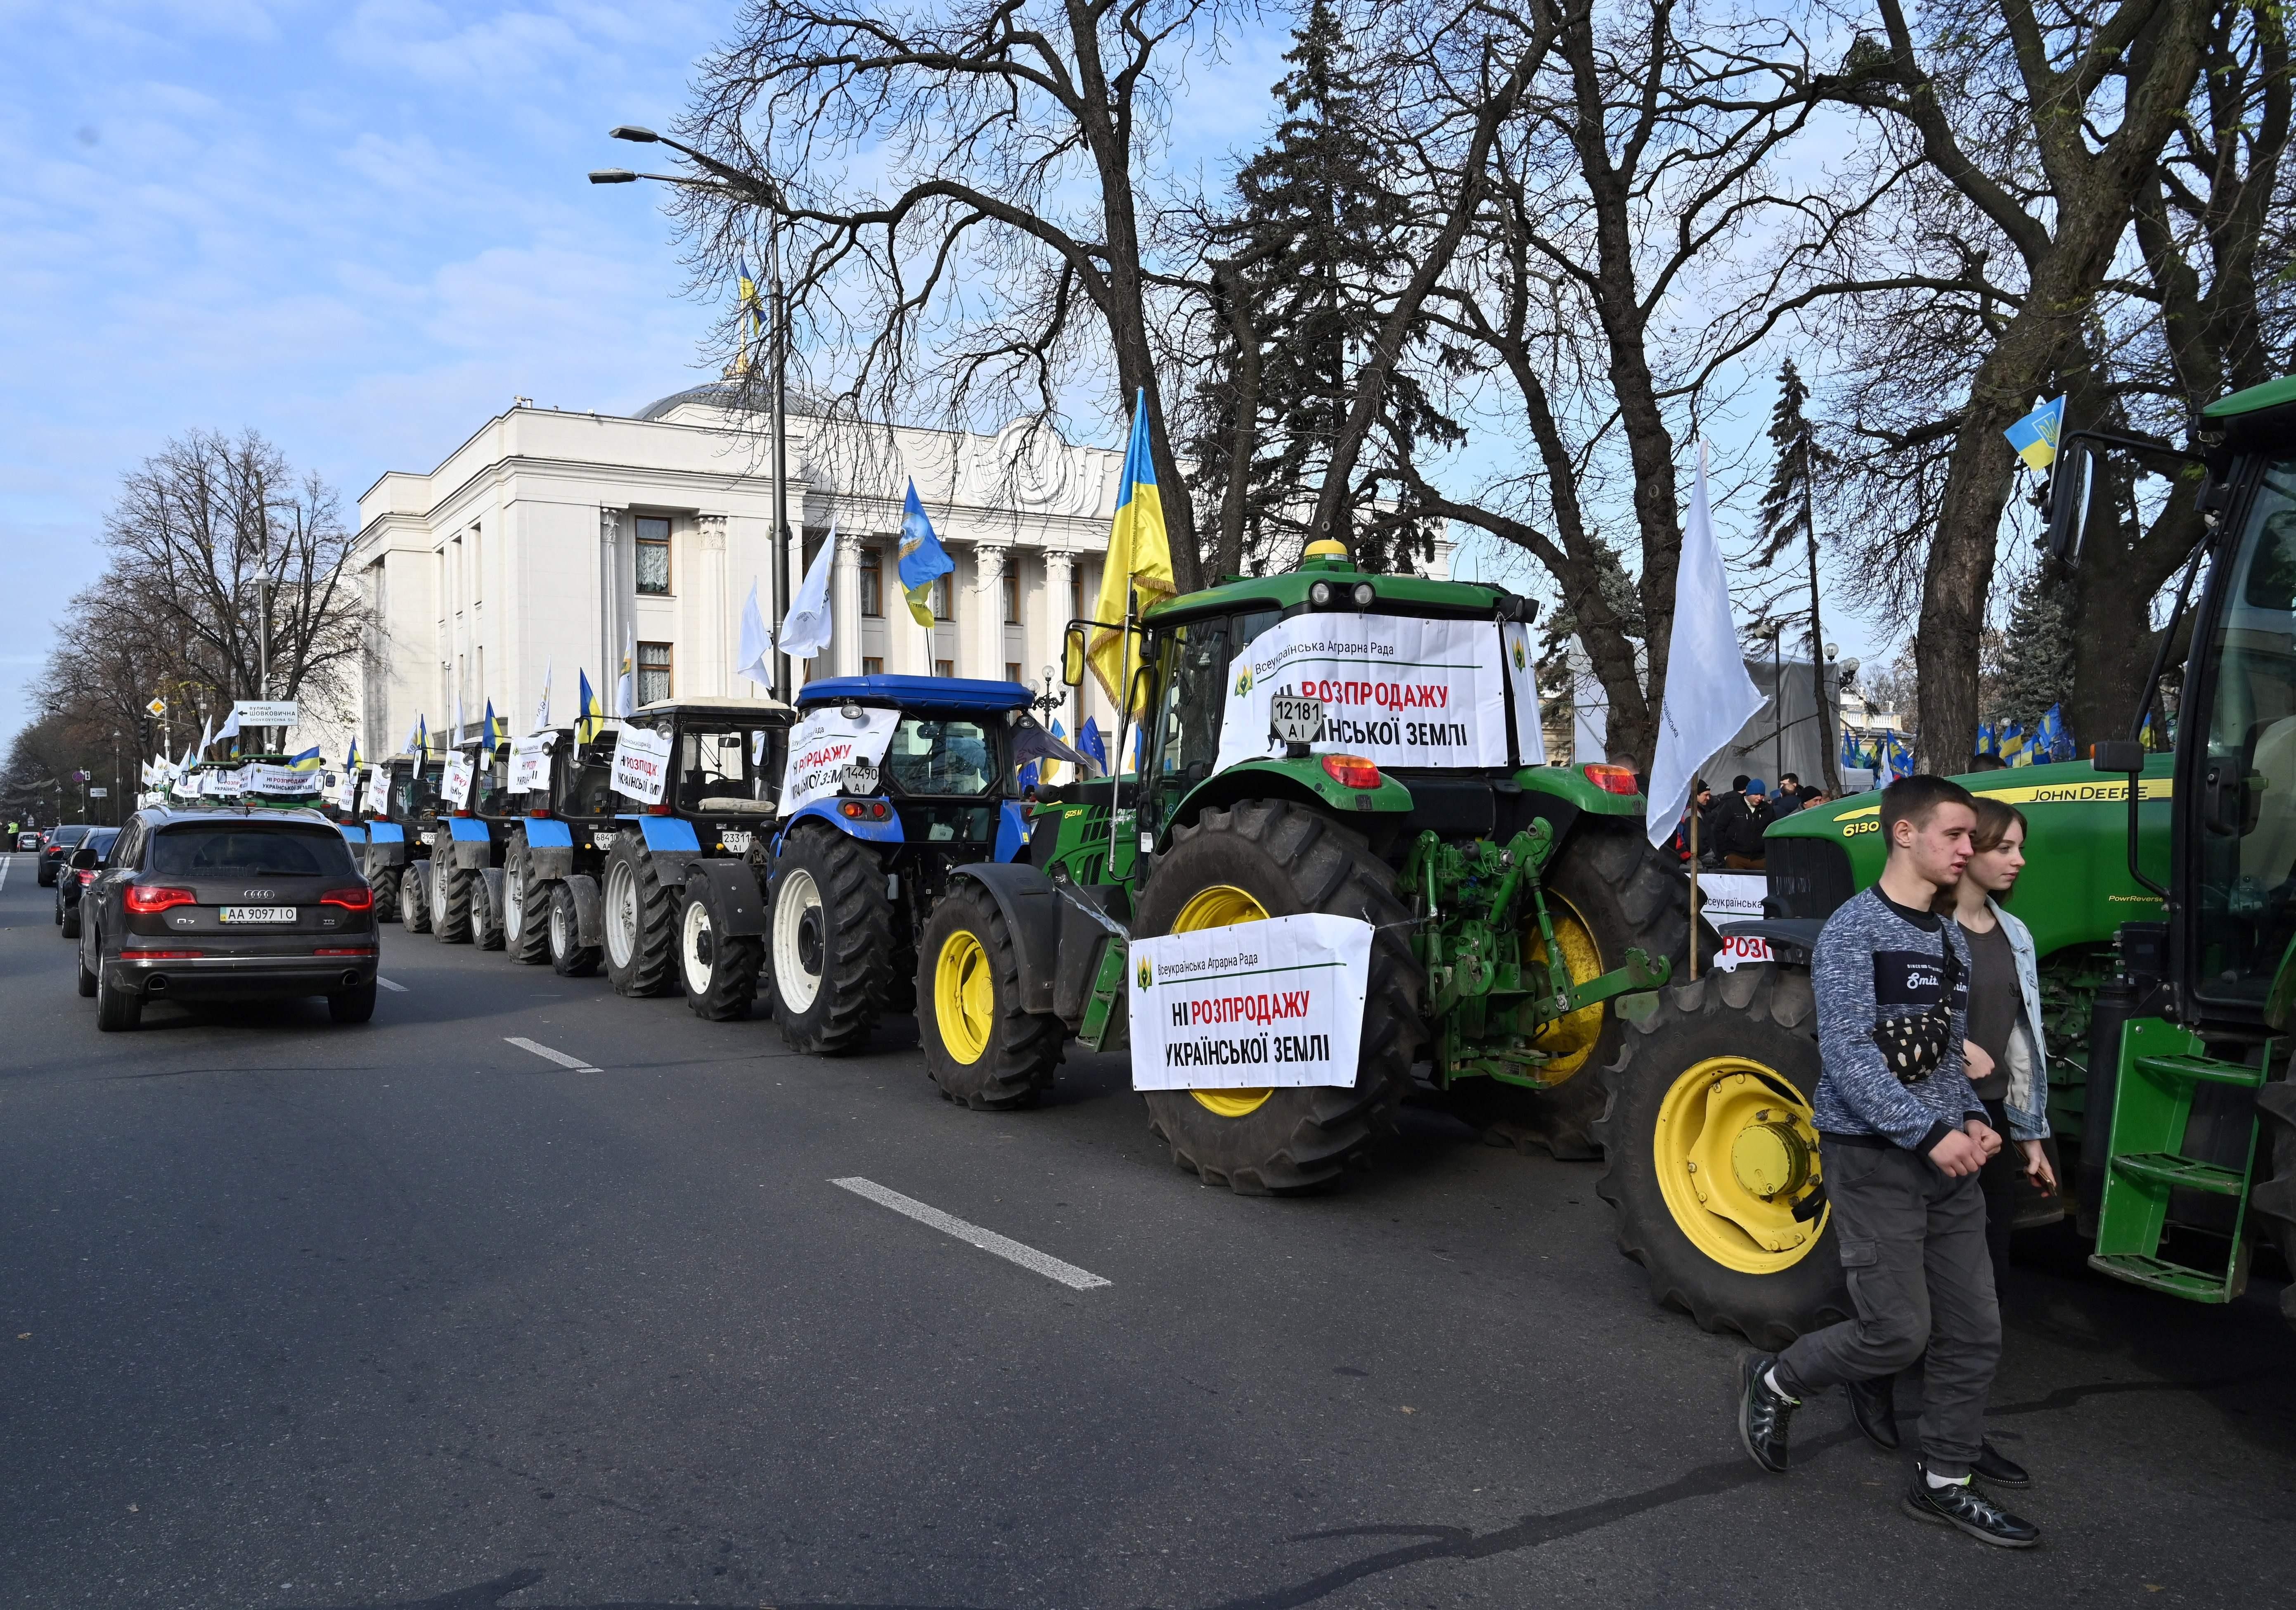 A couple walks along a line of tractors blocking the parliament in Kiev on November 12, 2019, during a rally to protest against government plans to lift the moratorium on agricultural land sales, a step long awaited by investors but opposed by the Ukrainians fearing a foreign land grab. The former Soviet country, whose stalling economy has been propped up by Western aid in recent years, is home to some of the largest swathes of cultivated land in Europe. (Photo by Sergei SUPINSKY / AFP) (Photo by SERGEI SUP